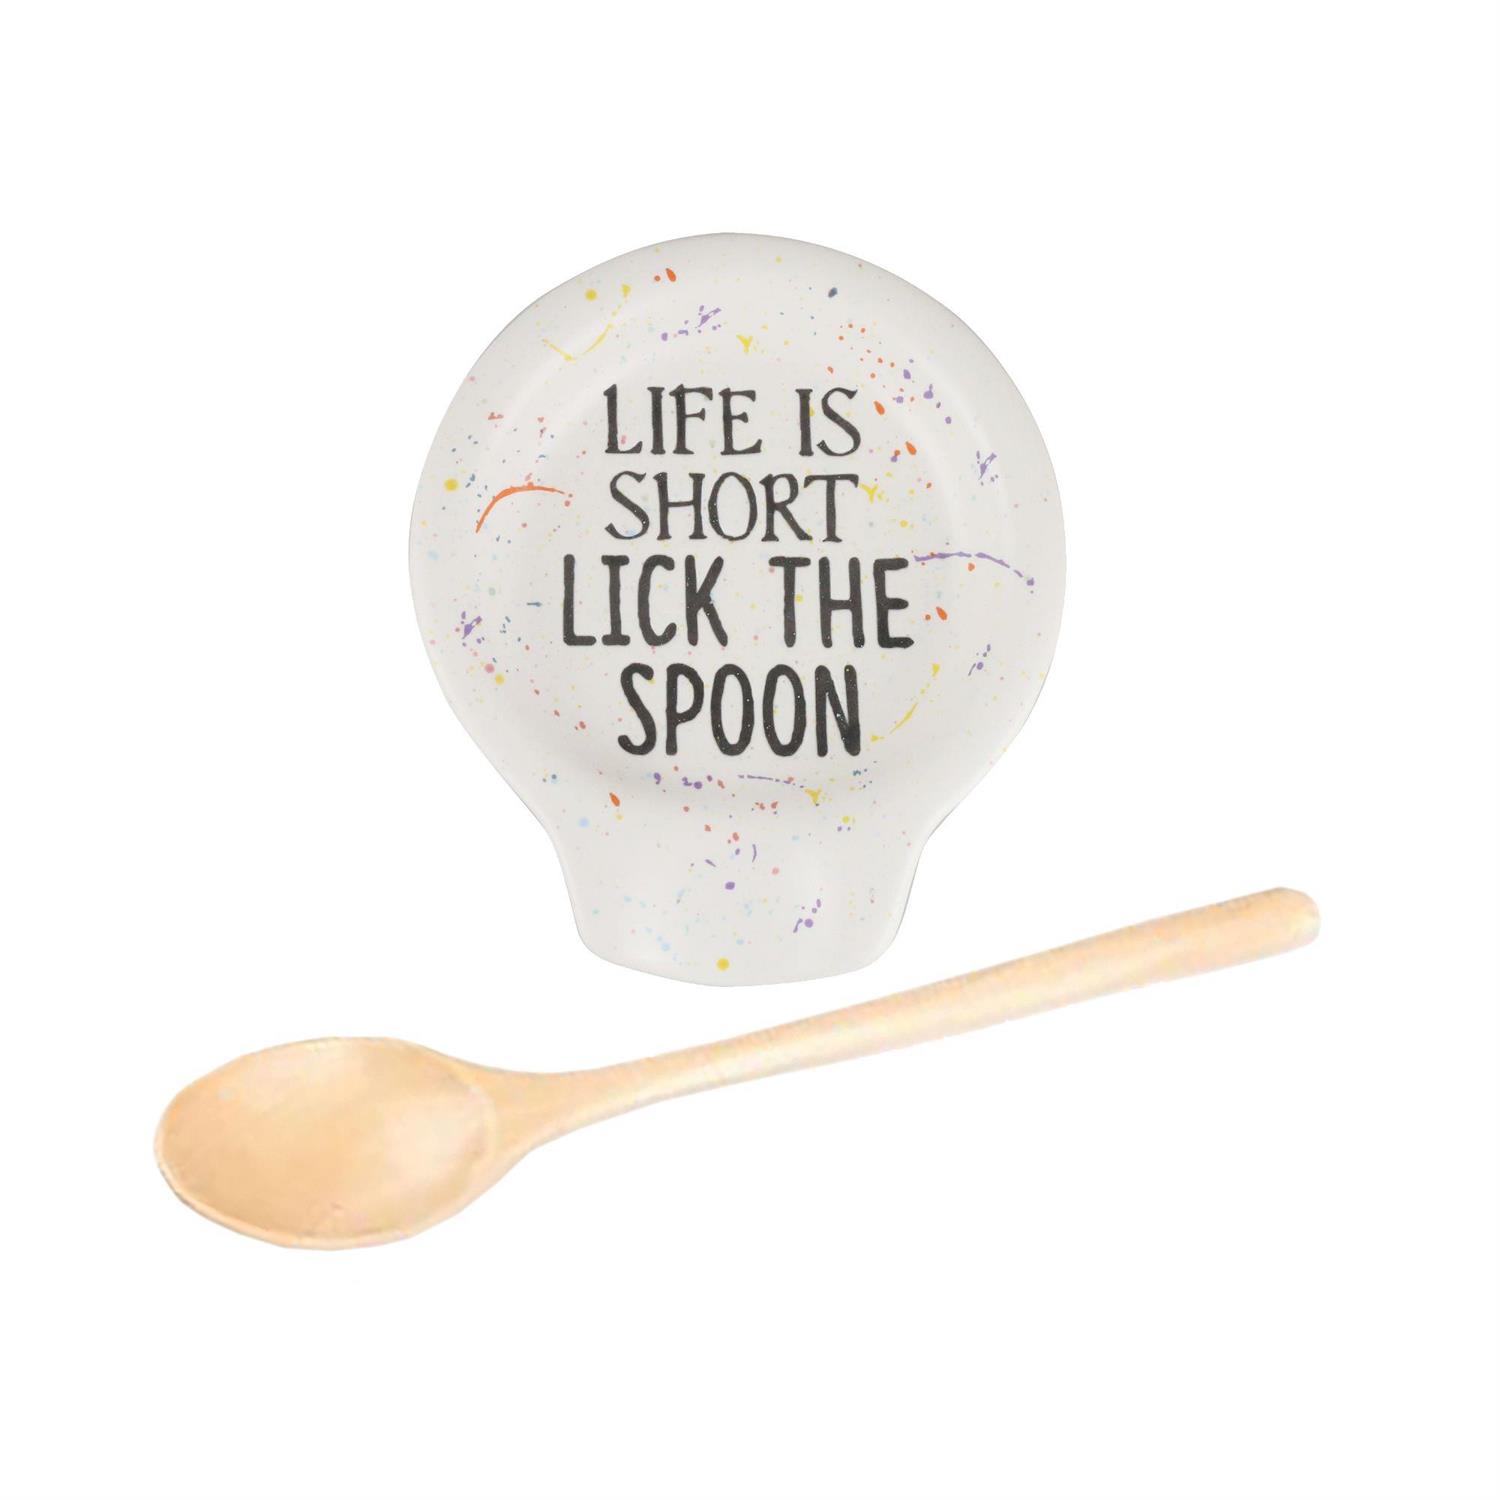 Enesco Gifts Our Name Is Mud Life Is Short Lick The Spoon Spoonrest Free Shipping Iveys Gifts And Decor